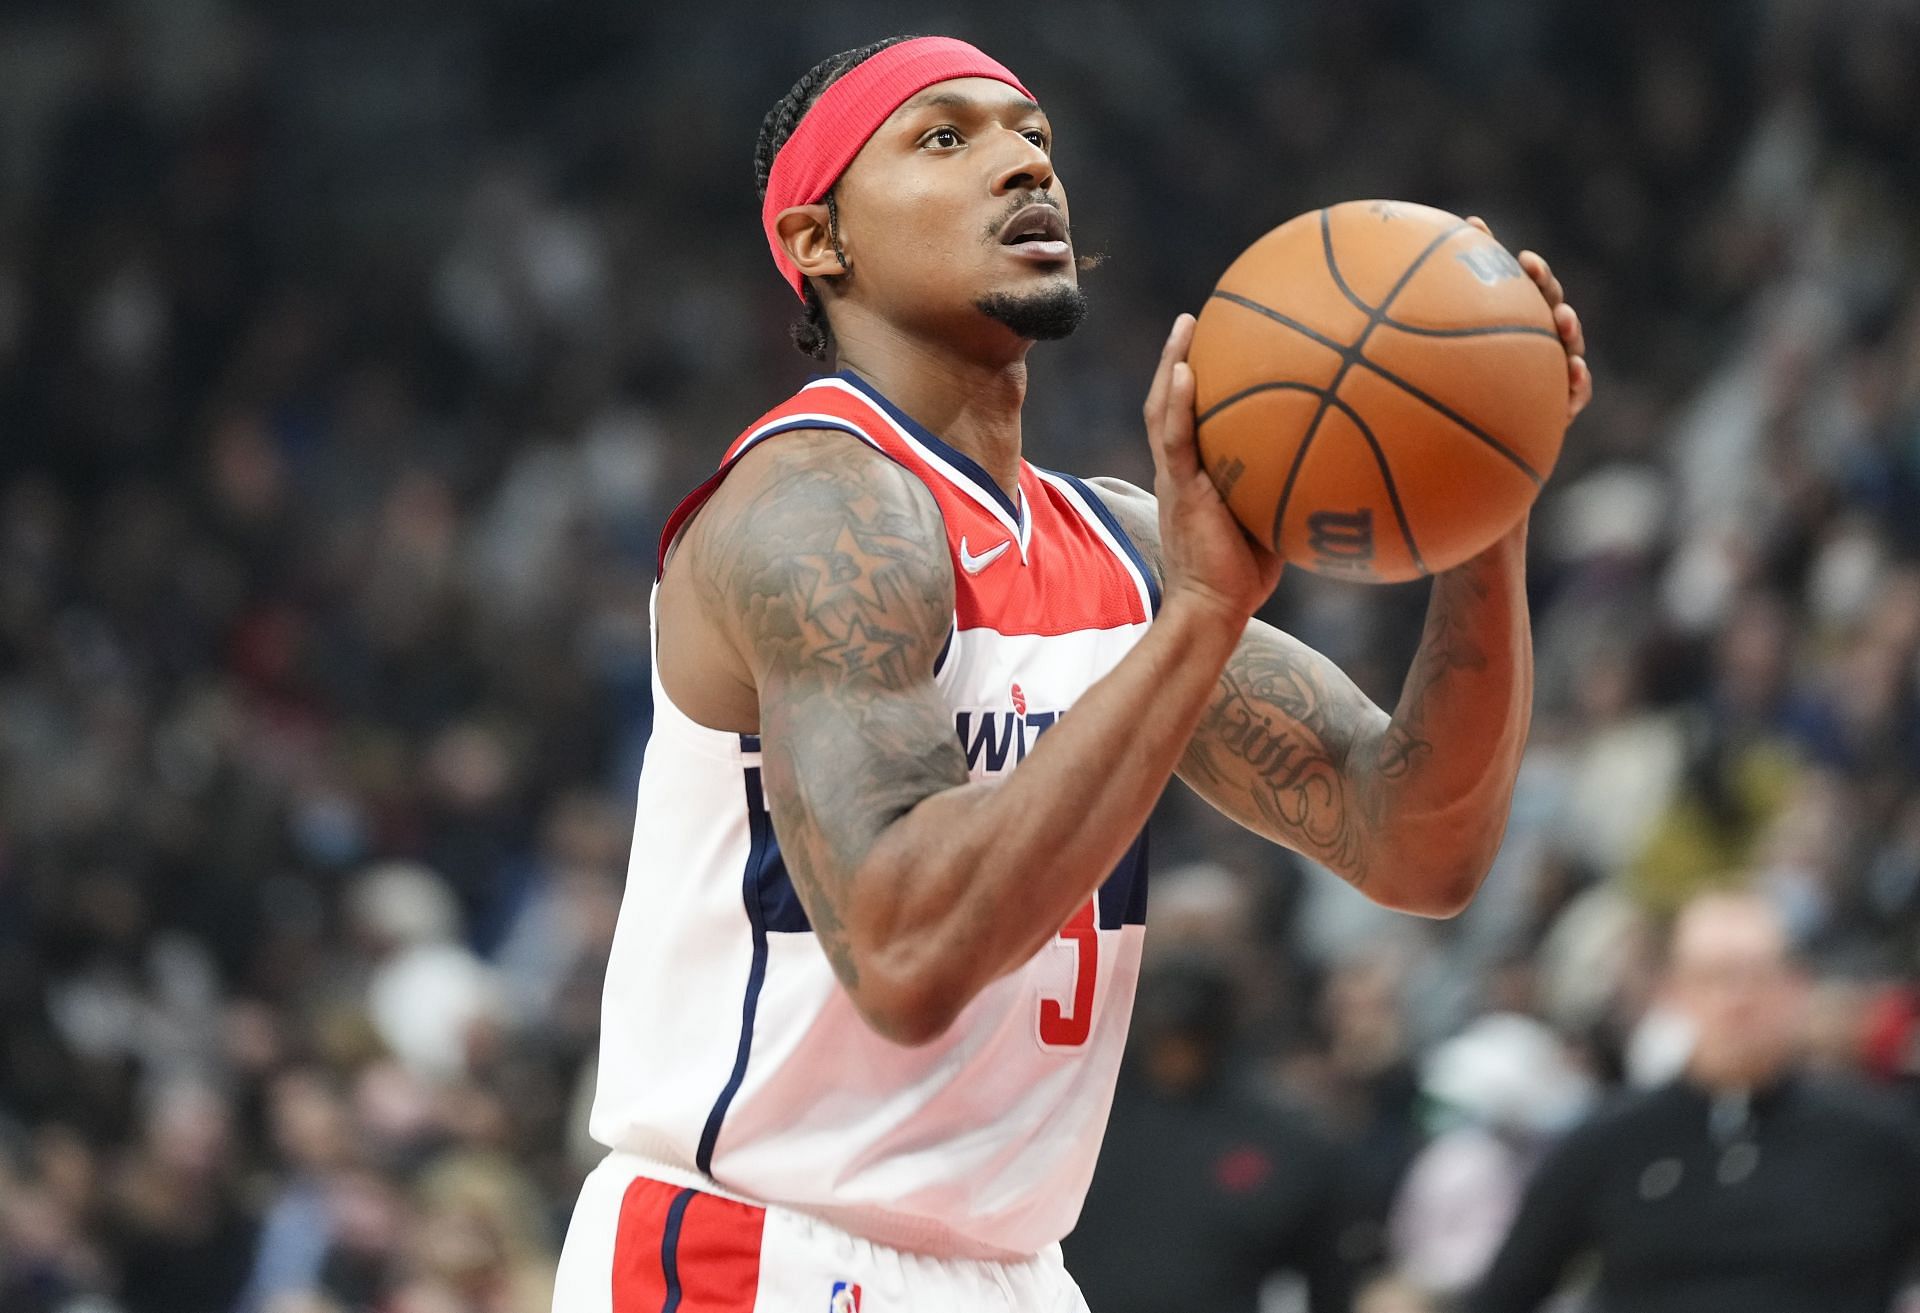 Bradley Beal attempts a free throw at a Washington Wizards game